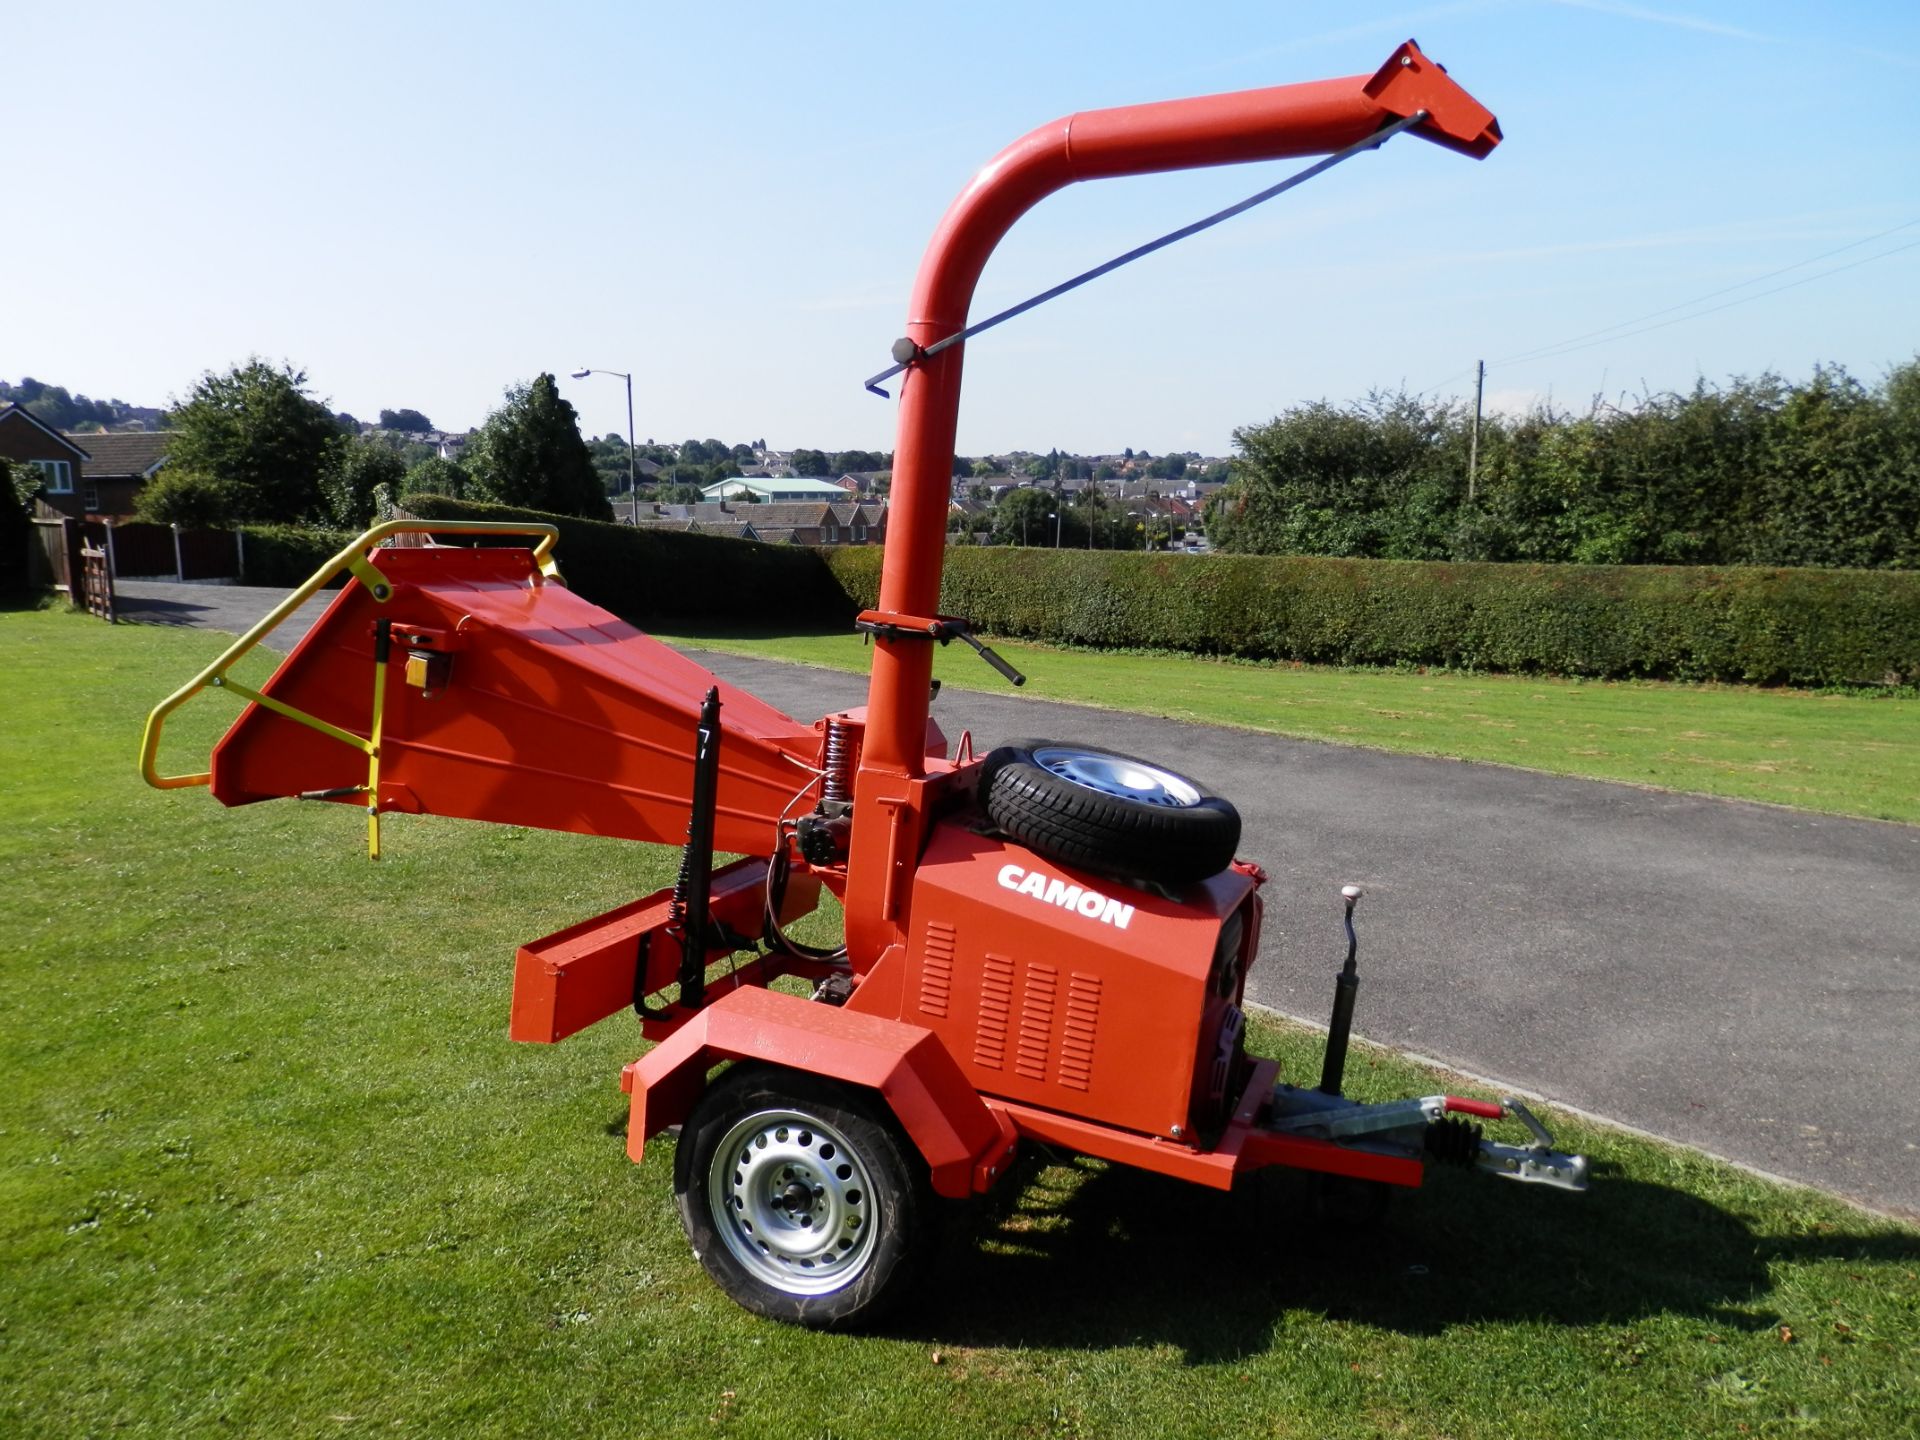 SUPERB CAMON C250P 5" PETROL POWERED WOOD CHIPPER APPROX 2007? SPARE WHEEL, WORKING WELL, NO VAT !! - Image 2 of 10